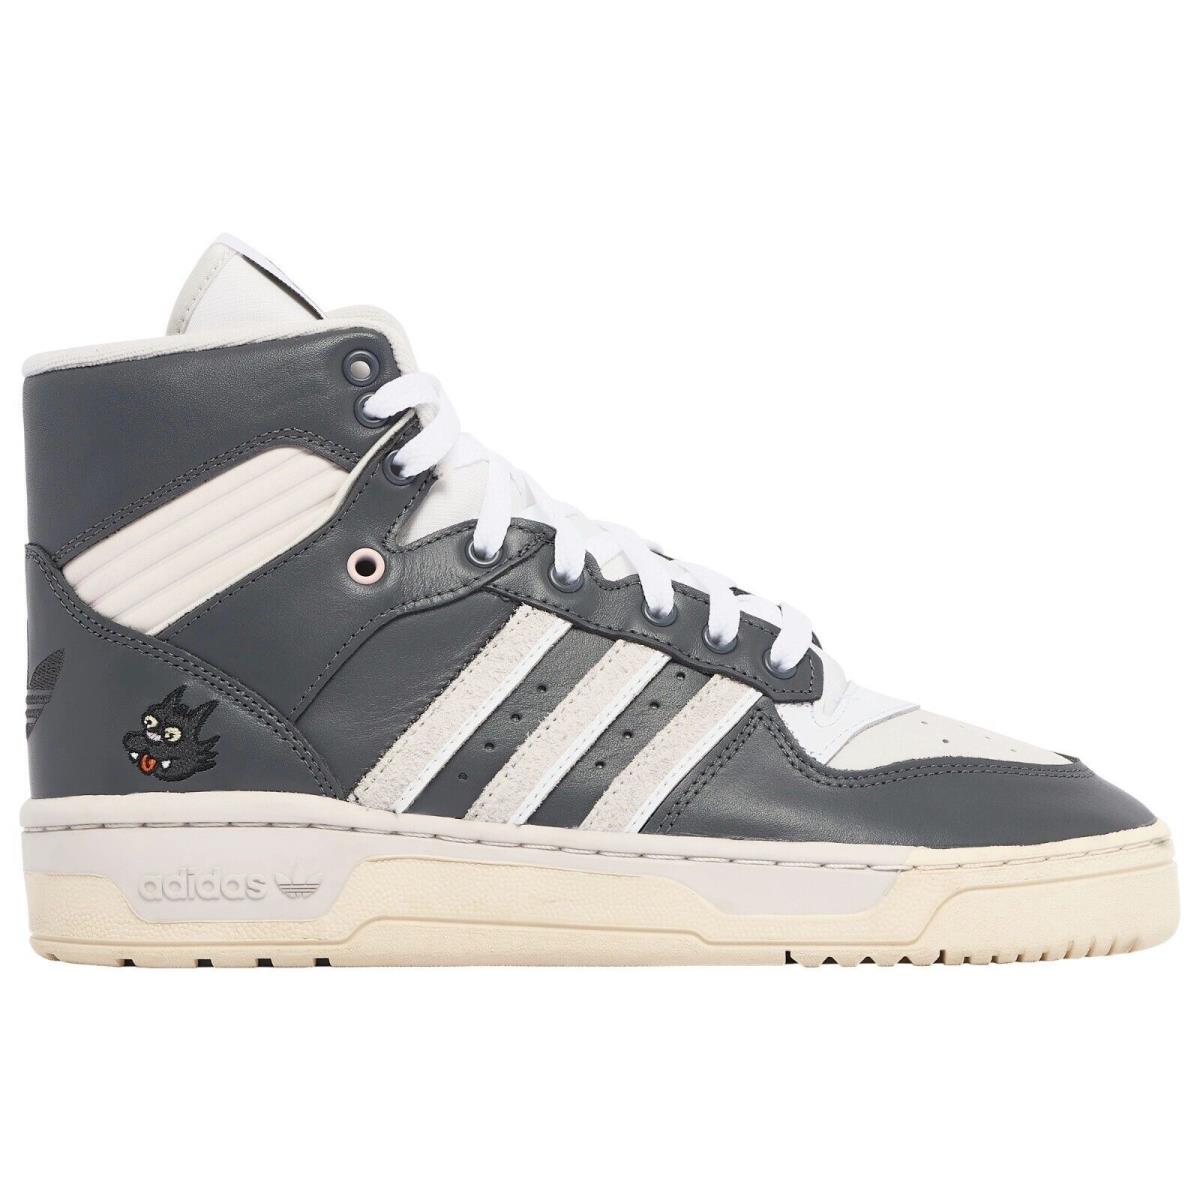 Adidas Originals Rivalry High x The Simpsons Men`s Sneakers Comfort Casual Shoes - Gray, Manufacturer: Grey/White